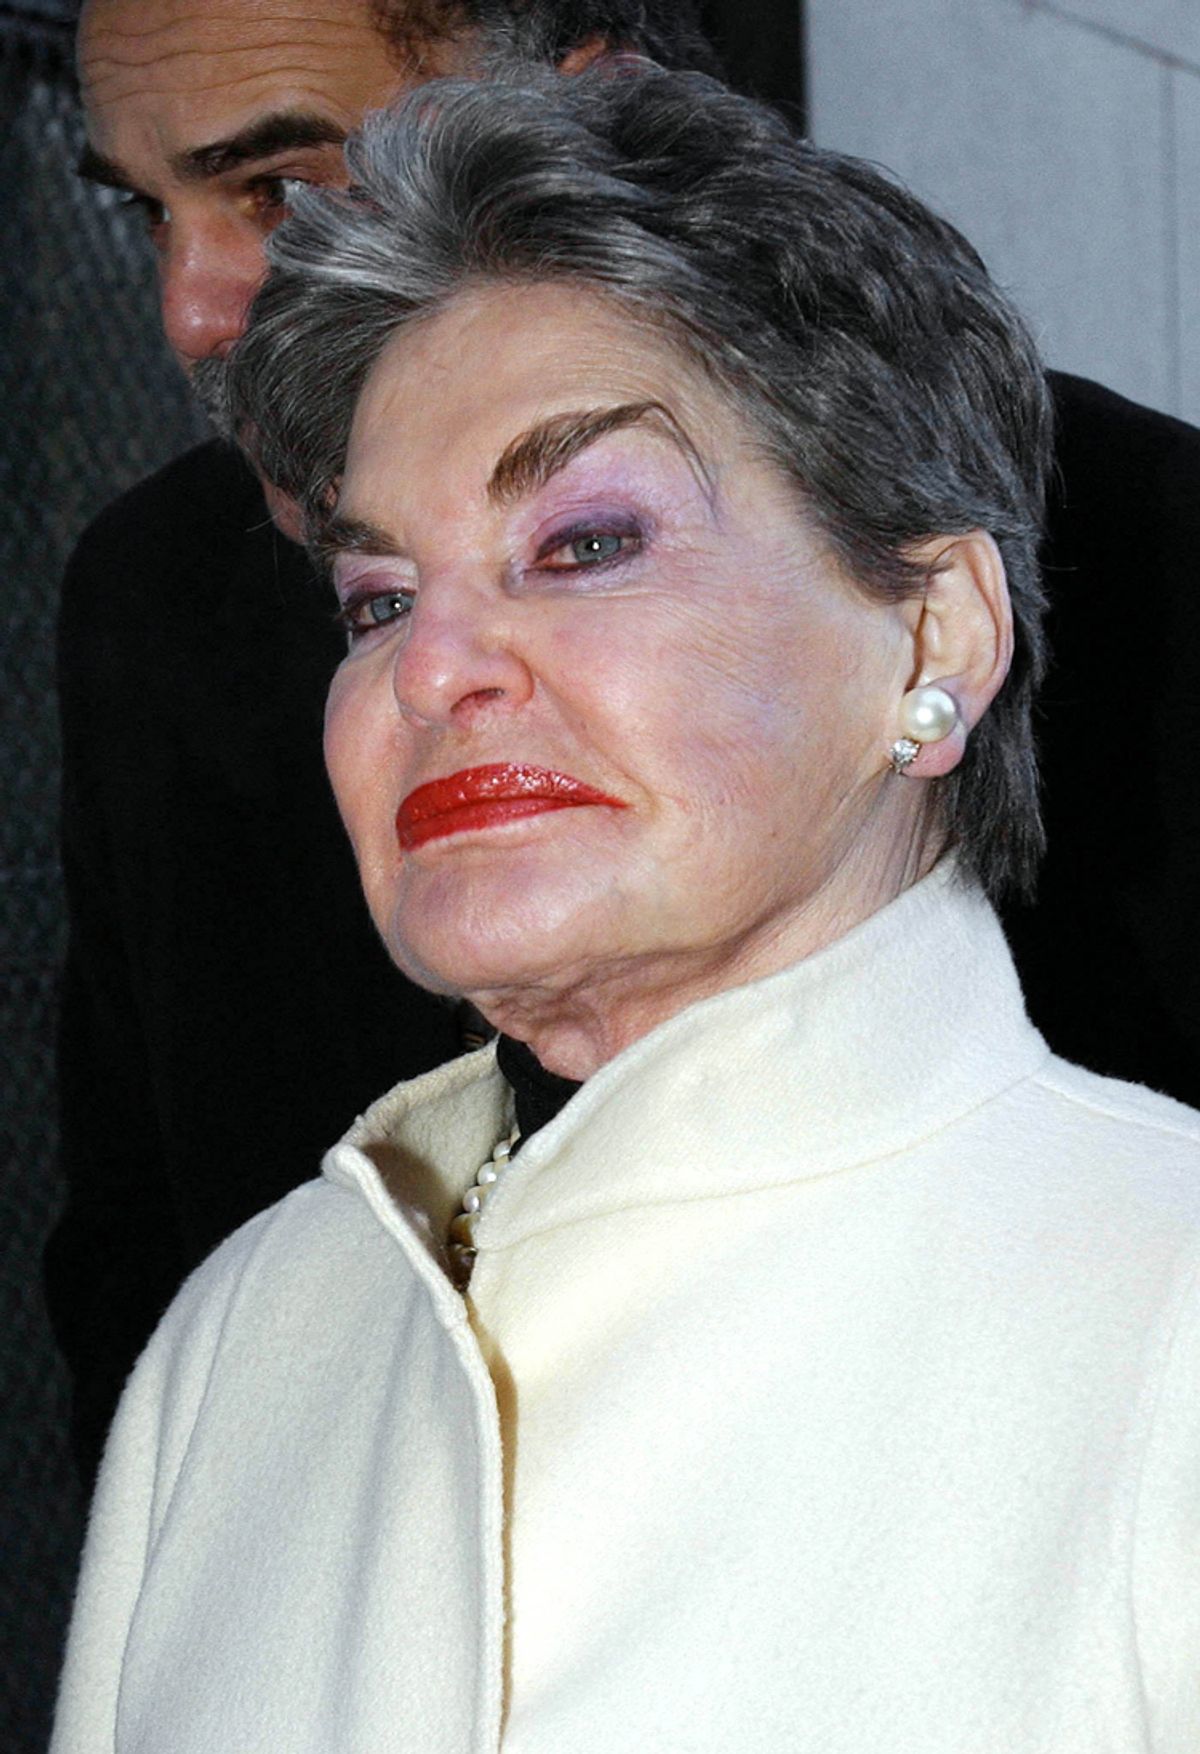 Real estate baroness Leona Helmsley appears for court to fight a former hotel manager's charges that she discriminates against homosexuals in New York on January 21, 2003. [Charles Bell, one of her former employees, is suing her alleging she fired him because of his sexual orientation.]    (Â© Chip East / Reuters)